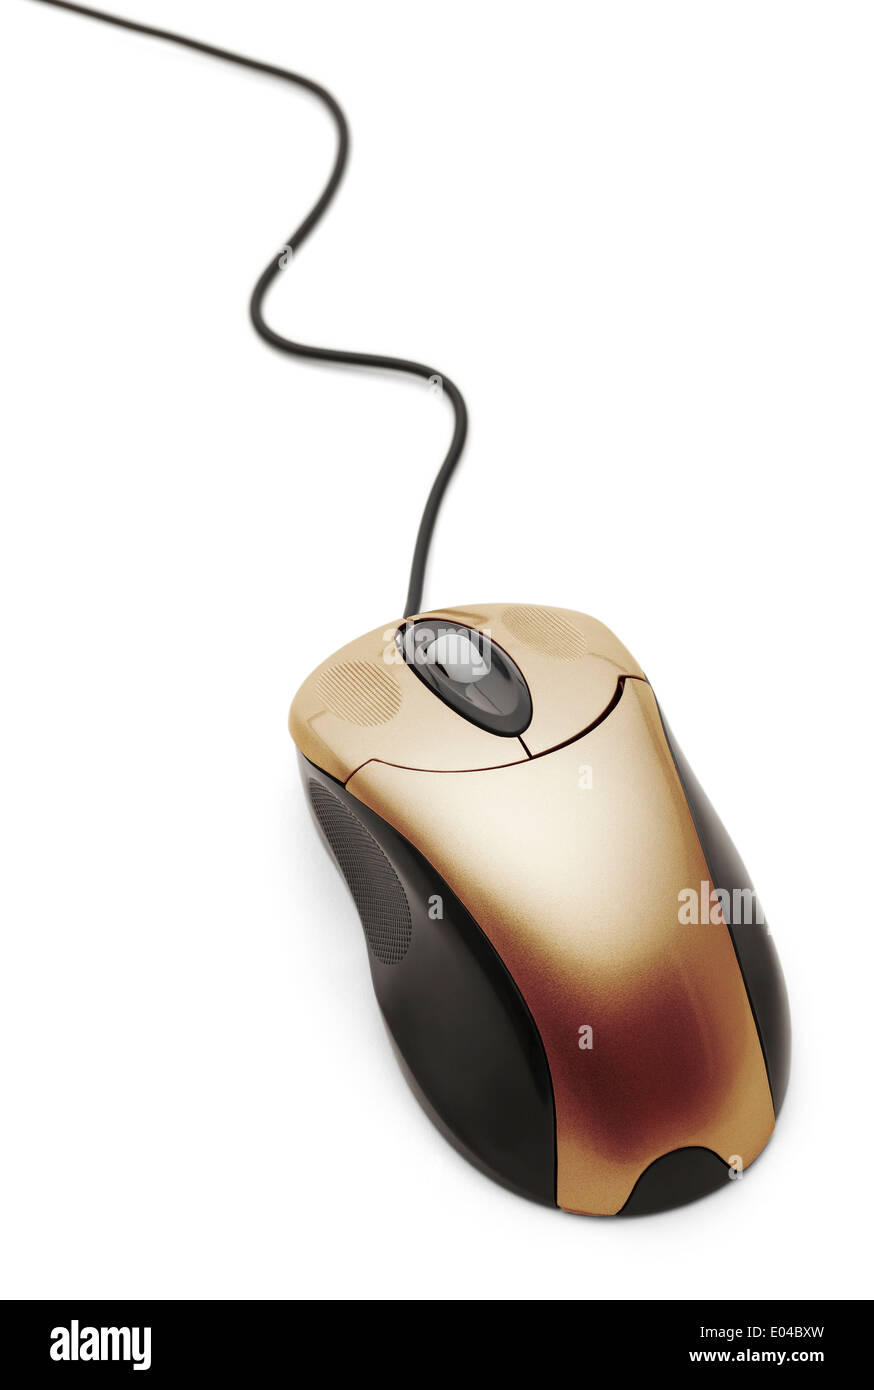 Gold Computer Mouse With Cord Isolated on White Background. Stock Photo